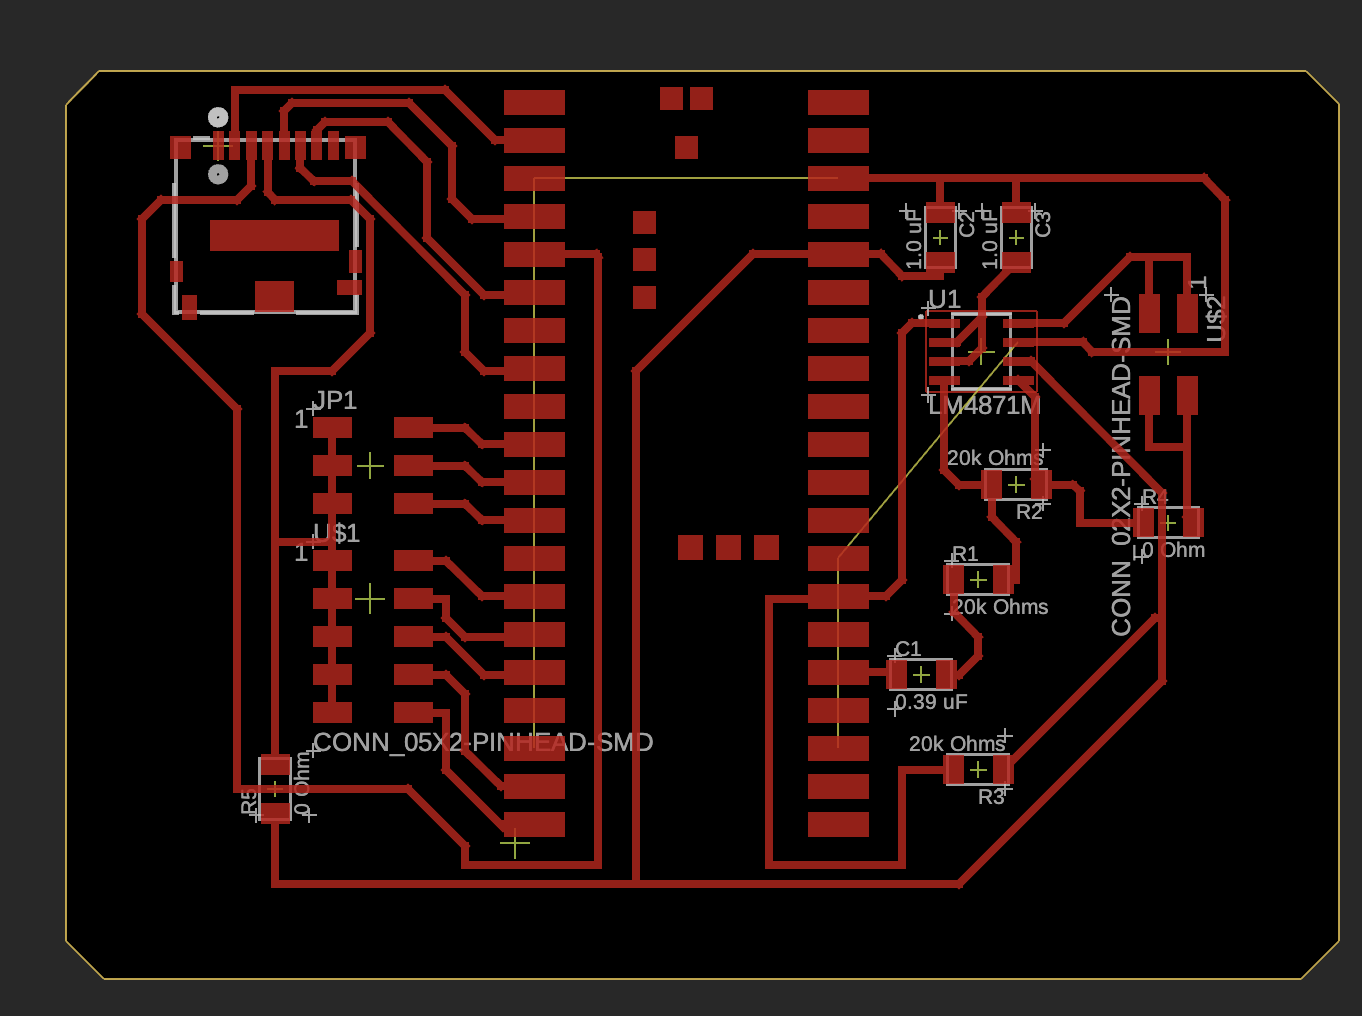 PCB final project